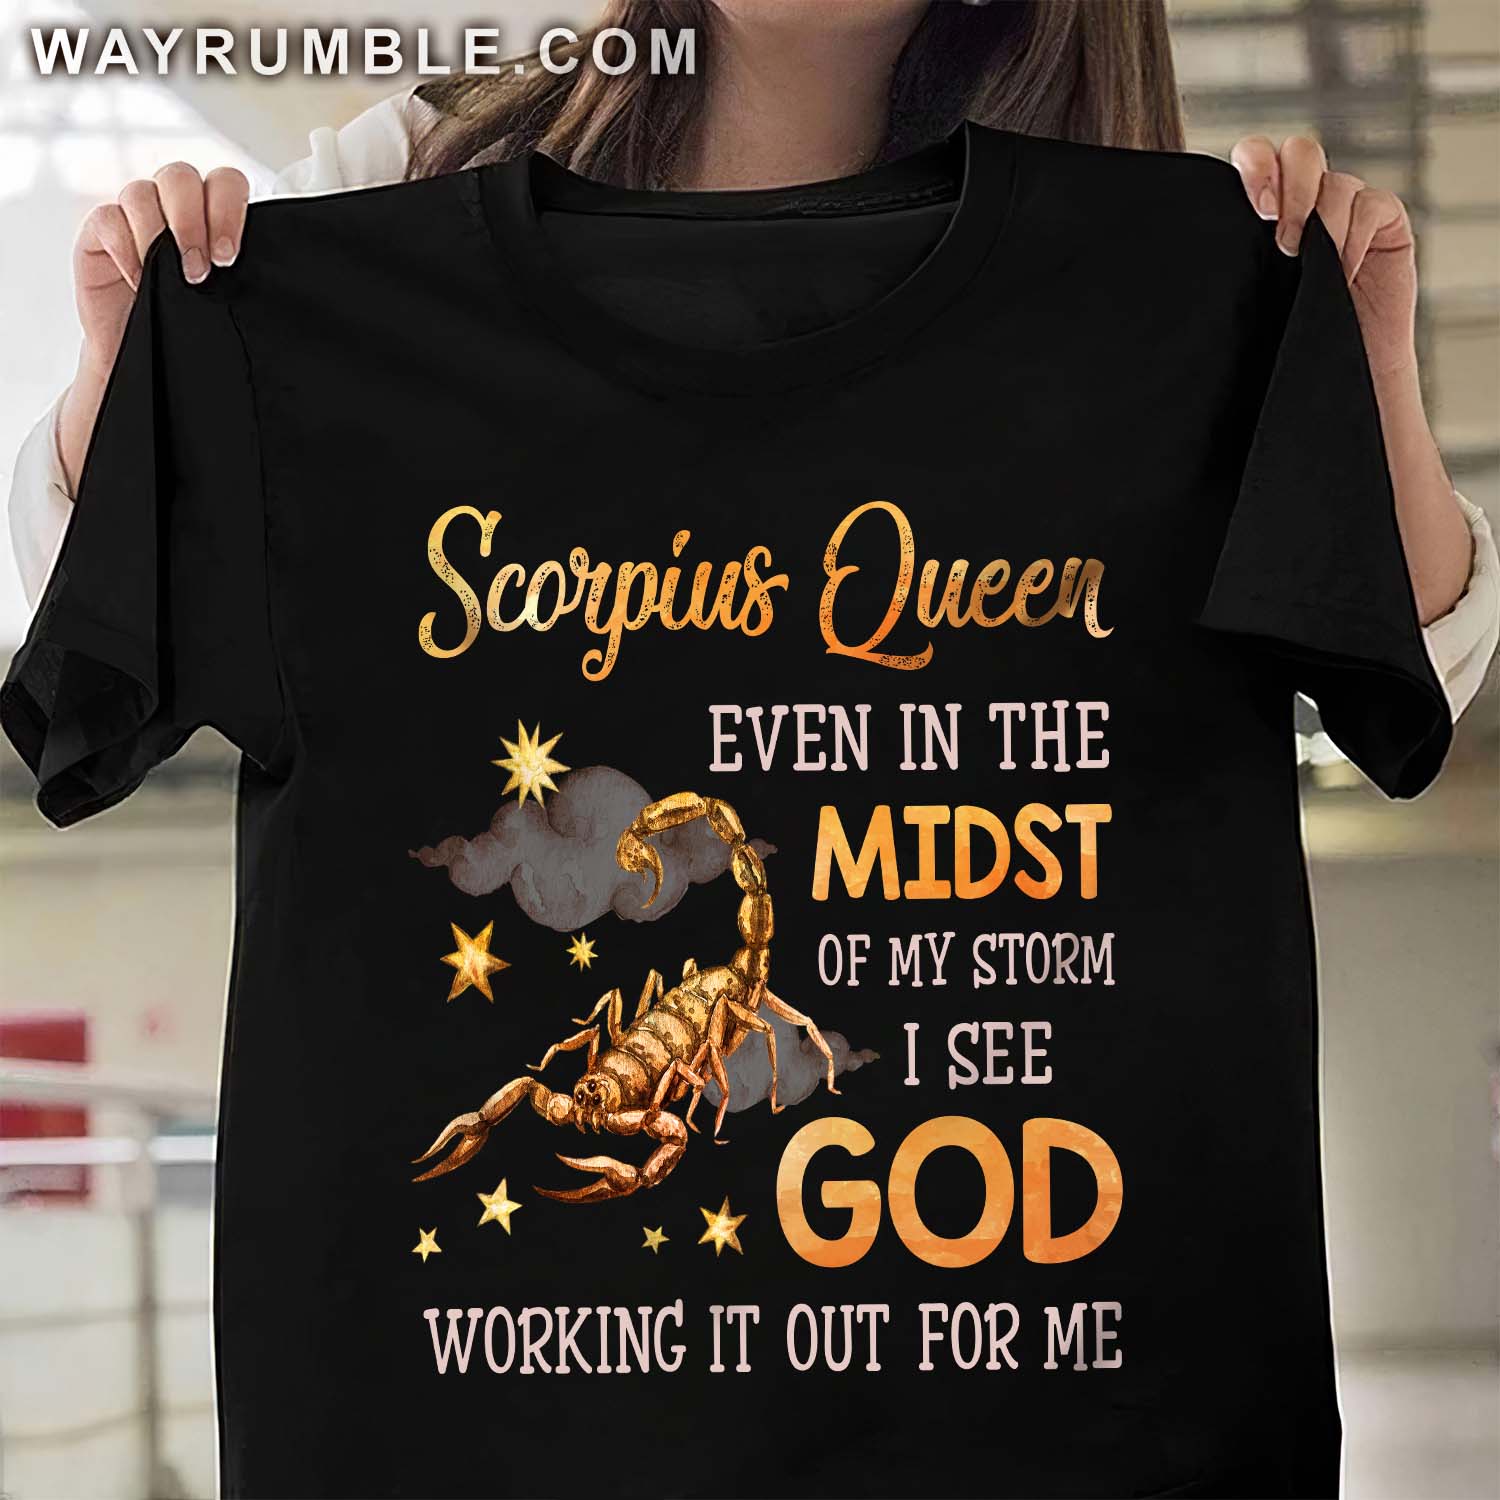 Scorpius Queen, Even in the midst of my storm I see God working it out for me – Jesus, Zodiac signs T Shirt